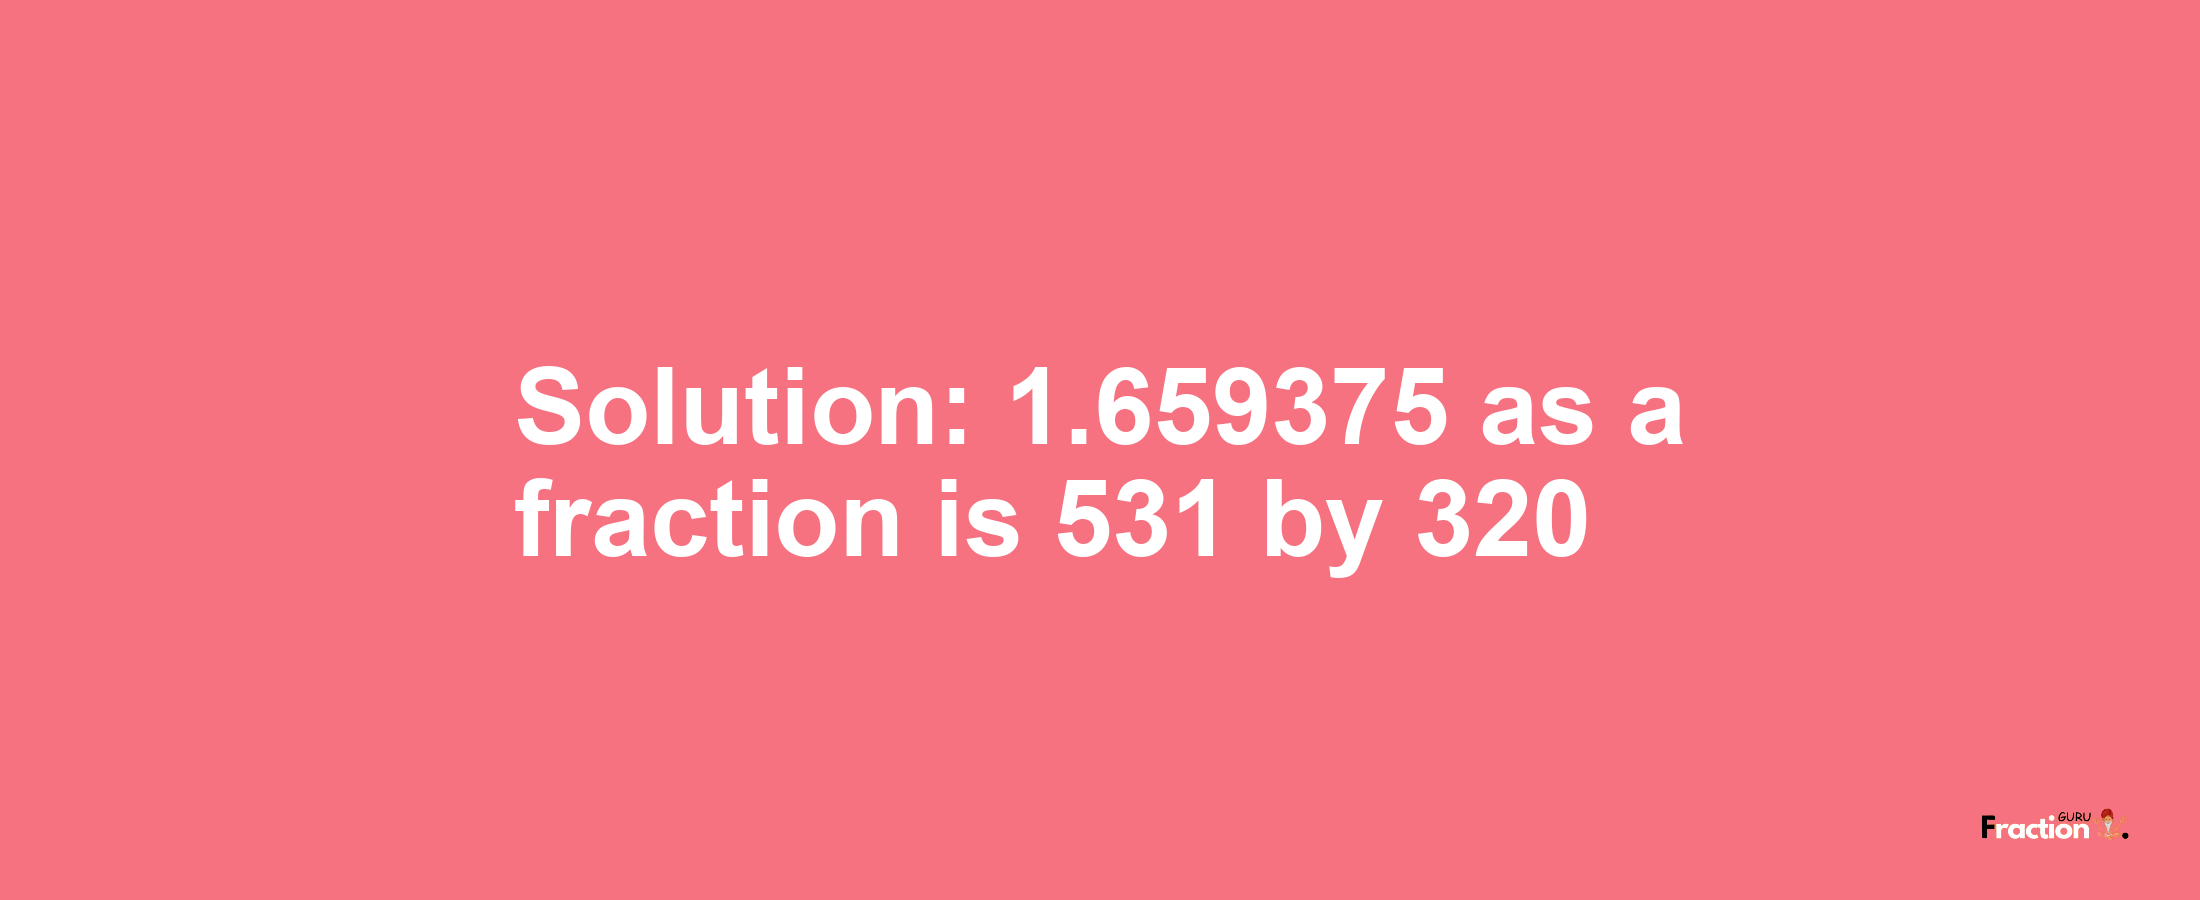 Solution:1.659375 as a fraction is 531/320